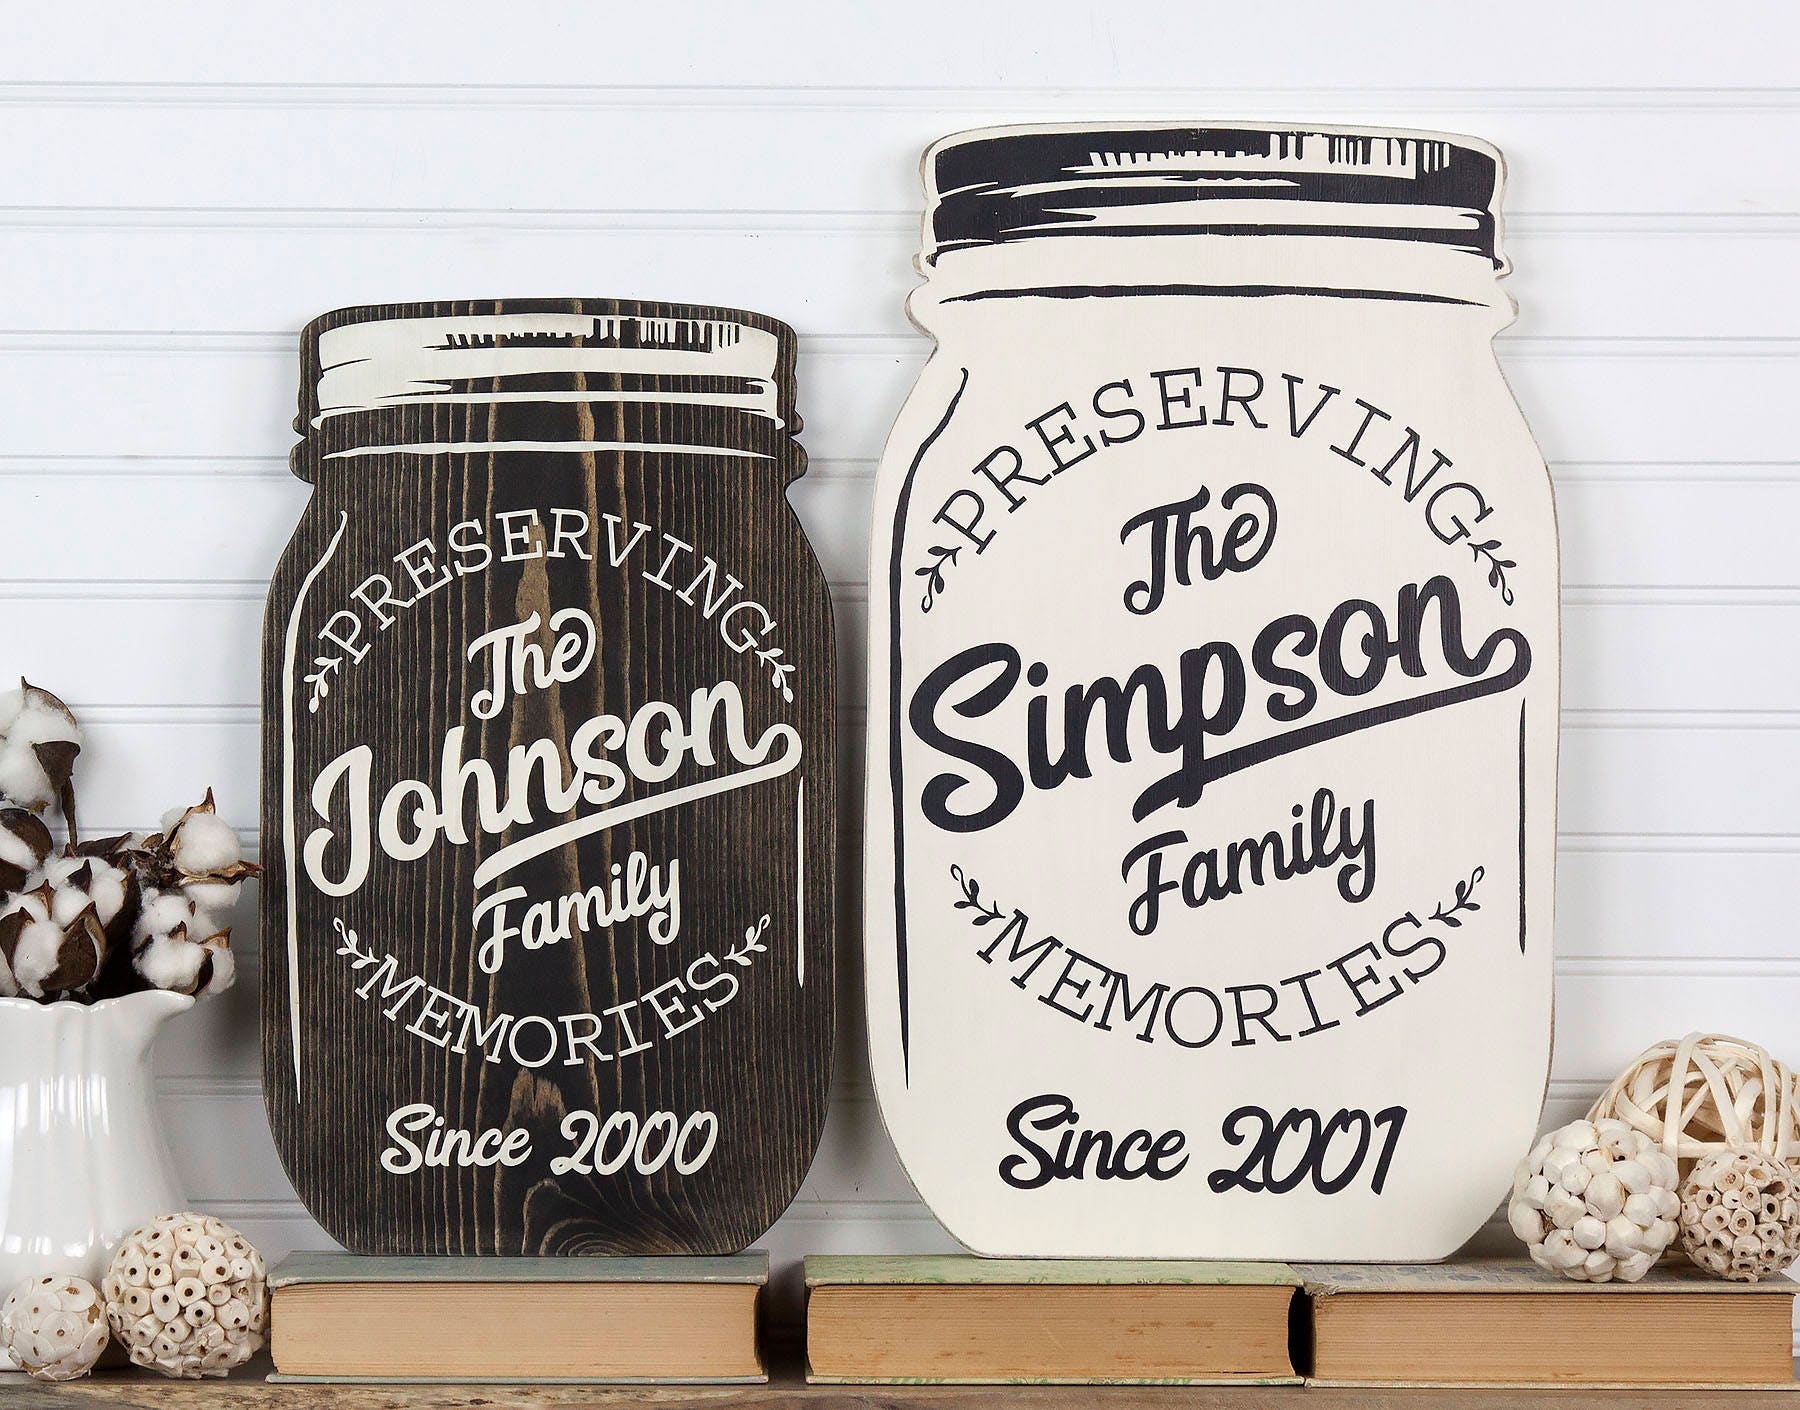  Mason Jar Sign 8 x 4-4/5-inch, Pack of 3 Wooden